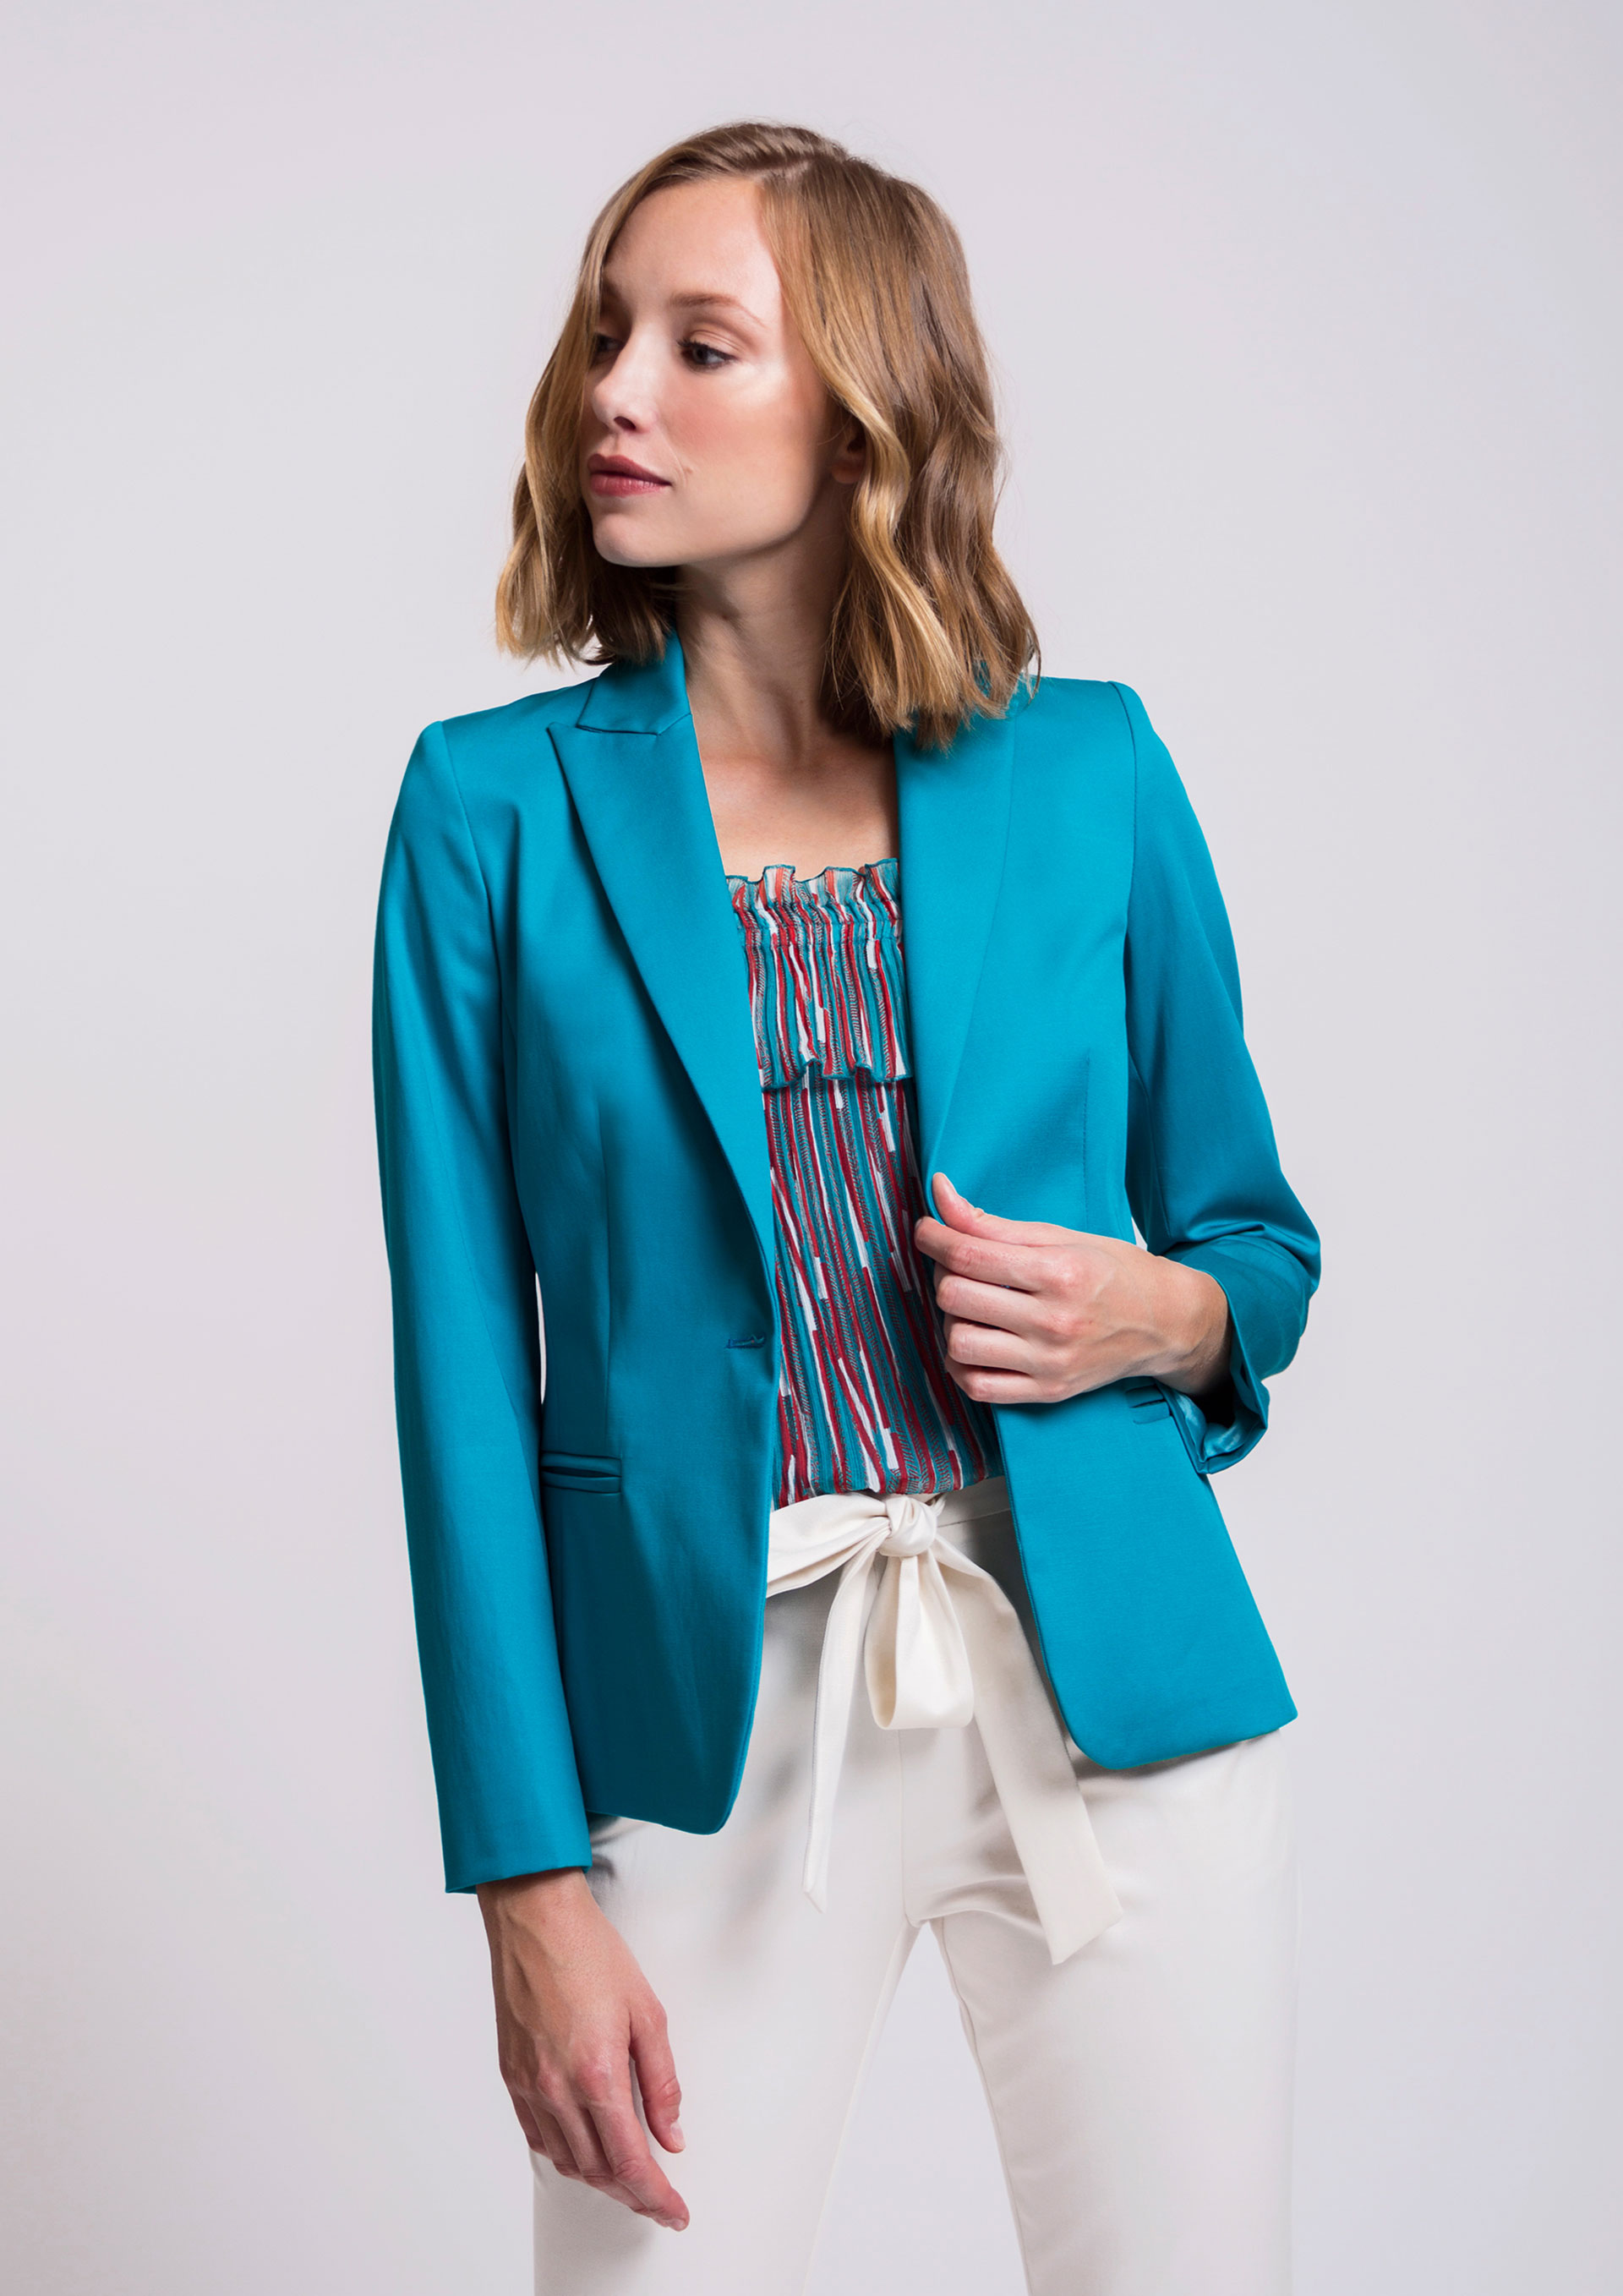 Fitted turquoise blazer